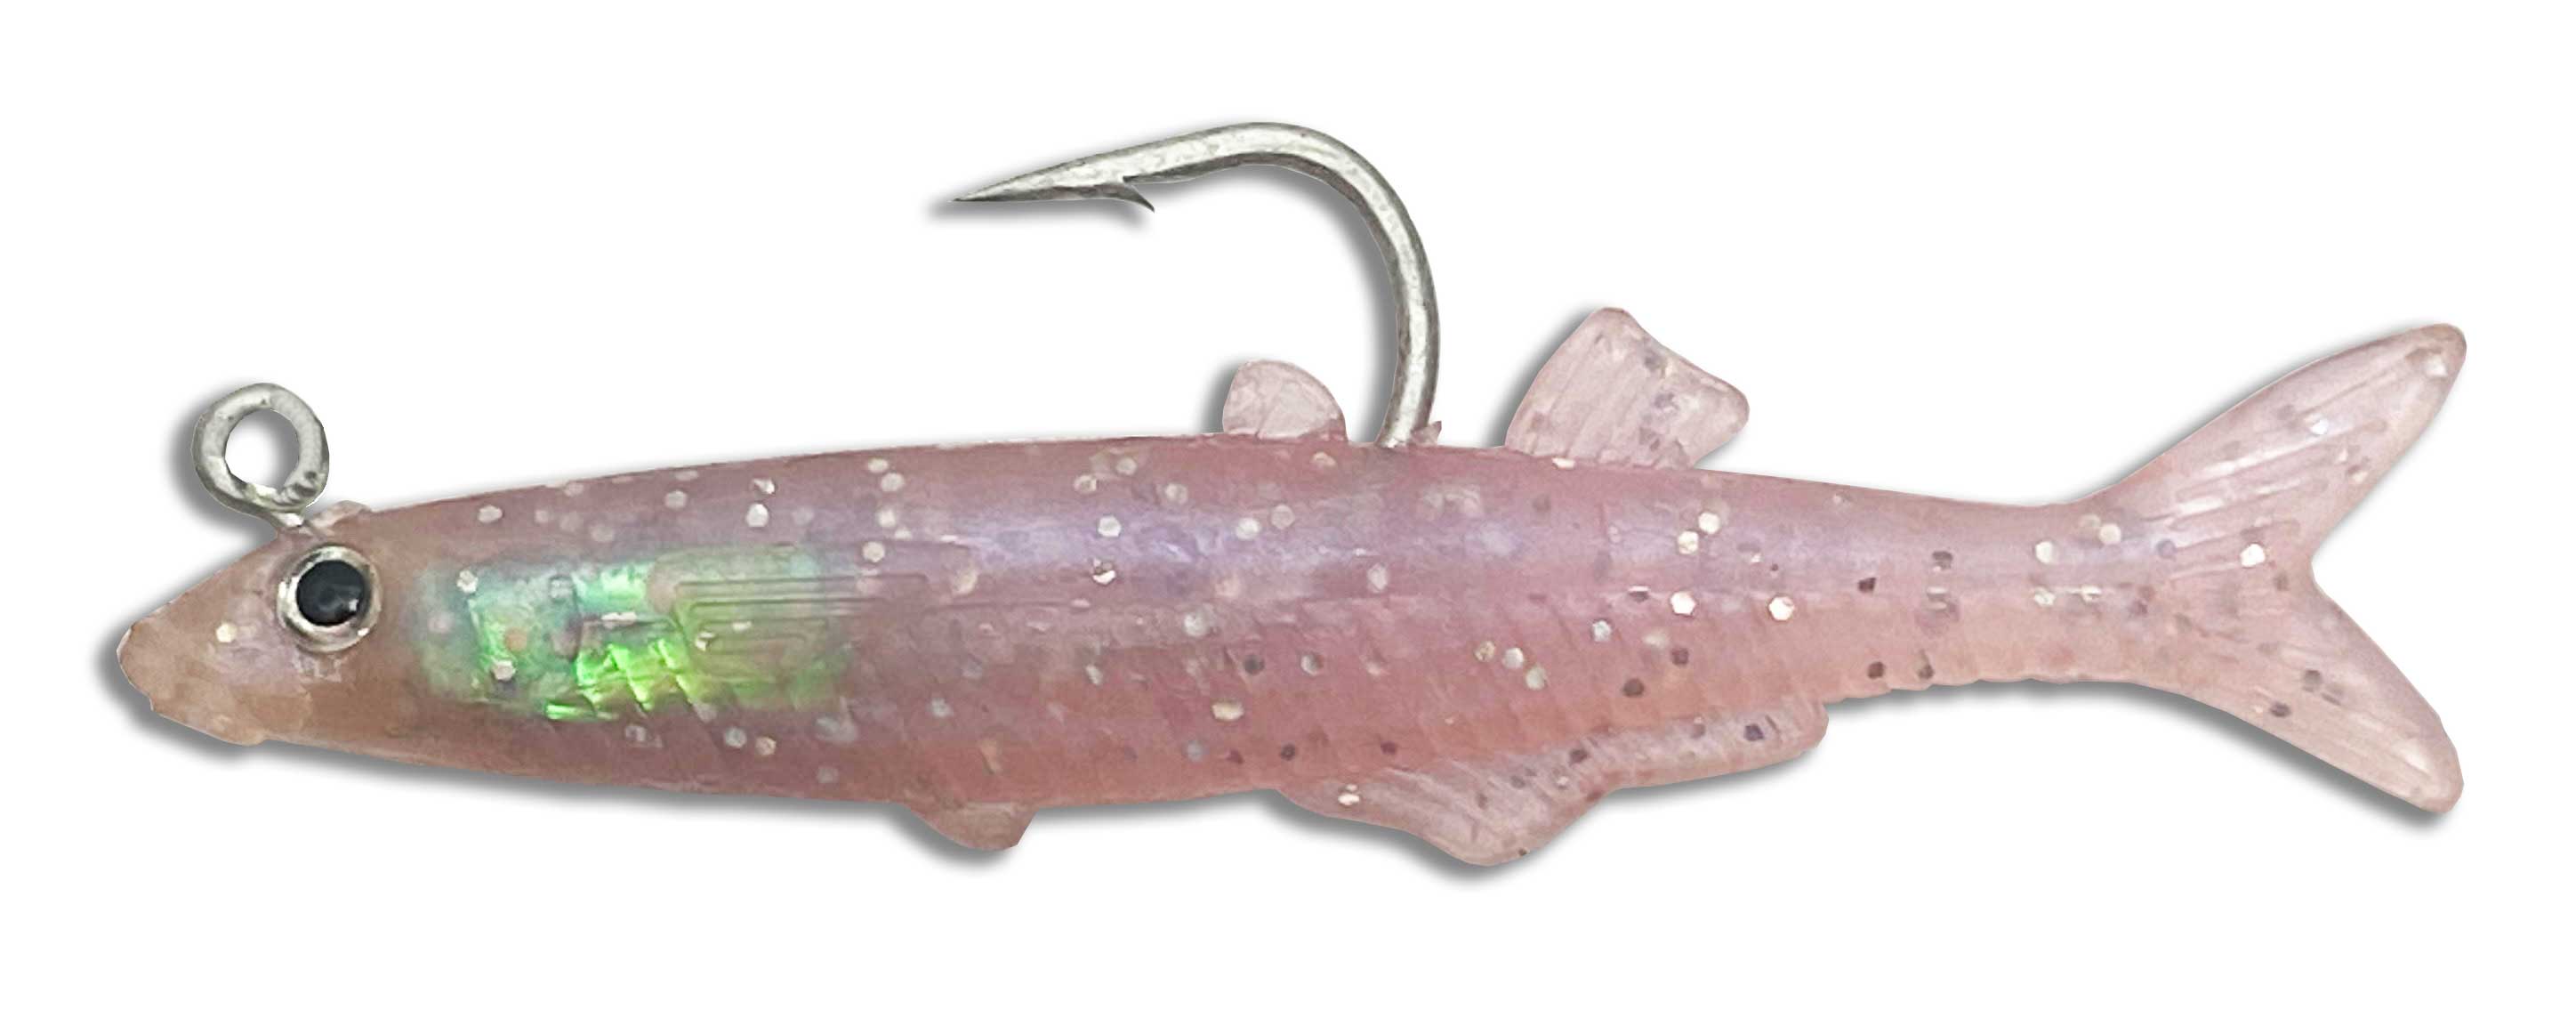 Almost Alive 2.75" Soft Rigged Glass Minnow 6 Pack Purple